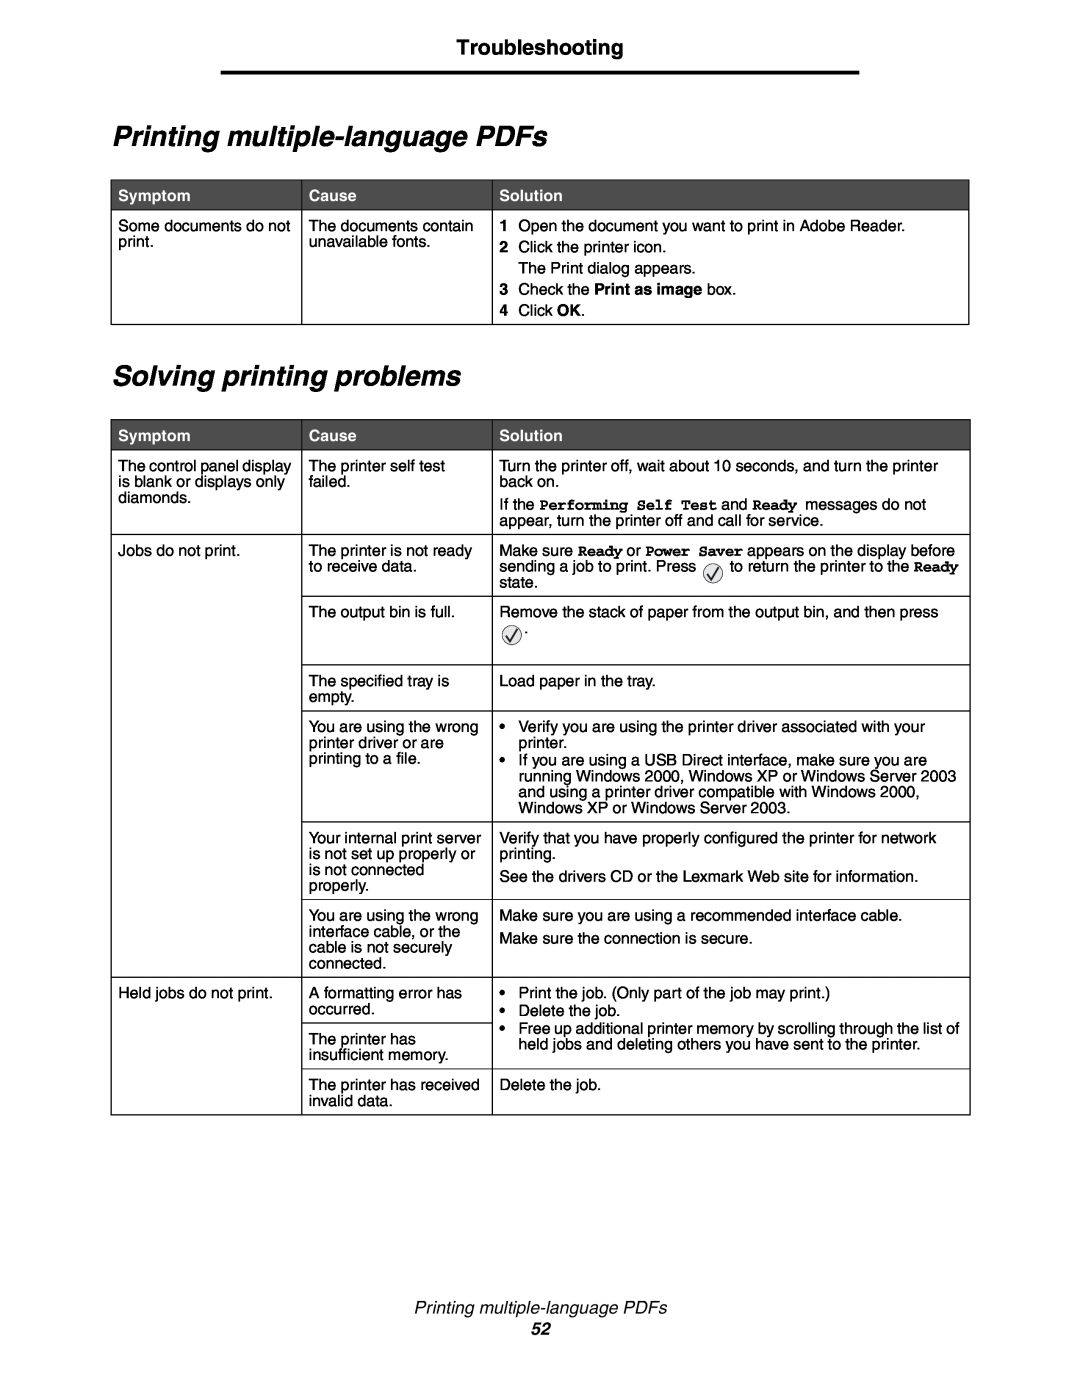 Lexmark 450dn manual Solving printing problems, Troubleshooting, Check the Print as image box 